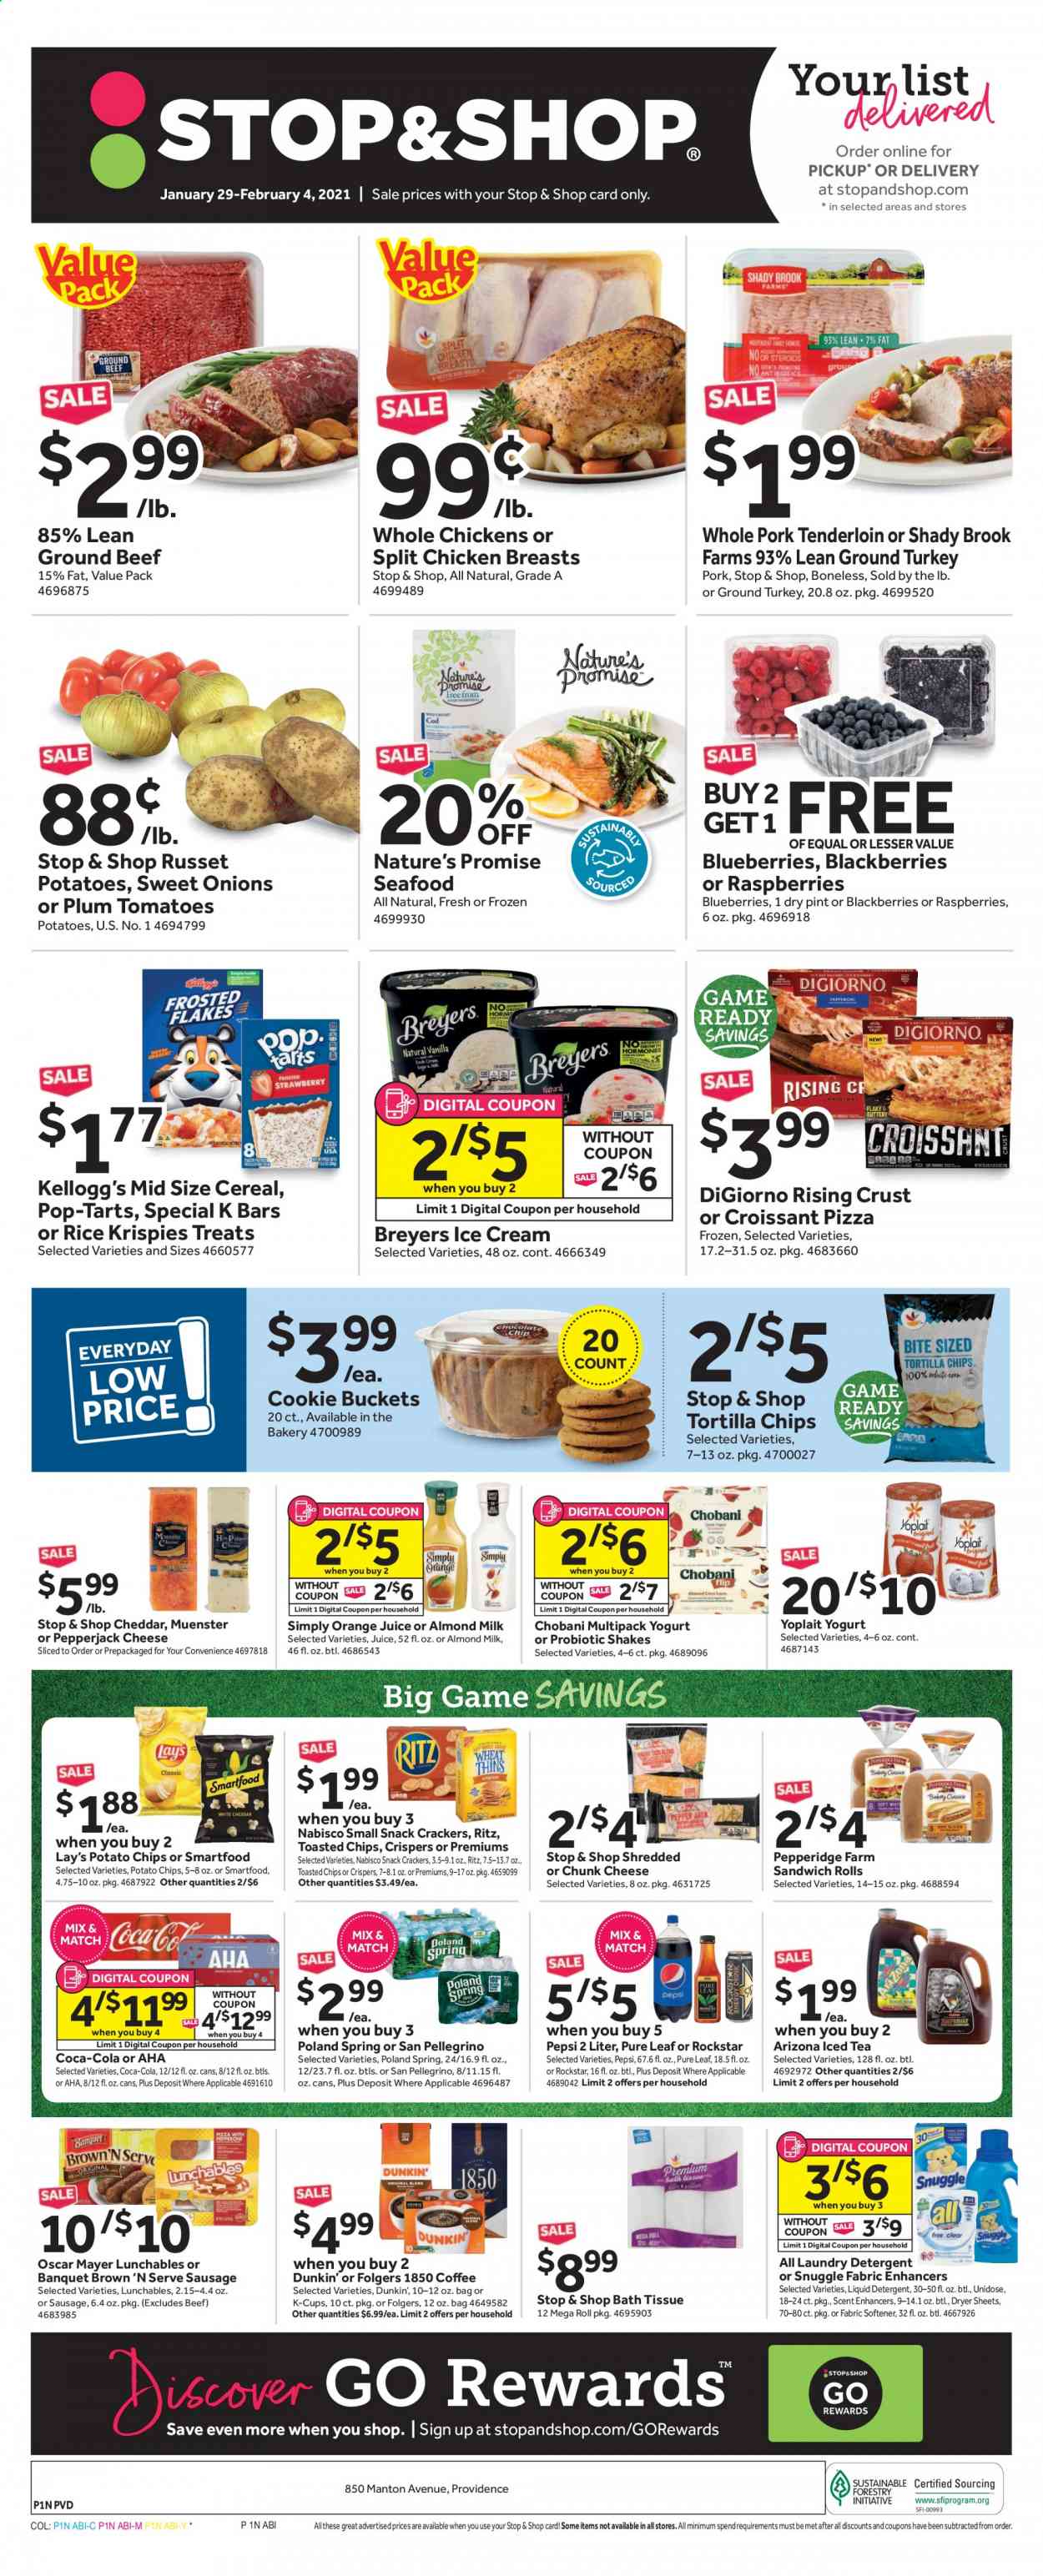 thumbnail - Stop & Shop Flyer - 01/29/2021 - 02/04/2021 - Sales products - blackberries, blueberries, raspberries, Nature’s Promise, croissant, ground turkey, chicken breasts, beef meat, ground beef, pork meat, pork tenderloin, seafood, pizza, Lunchables, Oscar Mayer, sausage, Brown 'N Serve, cheddar, Pepper Jack cheese, cheese, Münster cheese, chunk cheese, yoghurt, Yoplait, Chobani, almond milk, shake, ice cream, crackers, Kellogg's, Pop-Tarts, RITZ, tortilla chips, potato chips, snack, Lay’s, Smartfood, cereals, Rice Krispies, Coca-Cola, Pepsi, orange juice, juice, AriZona, Rockstar, Pure Leaf, Folgers, coffee capsules, K-Cups, bath tissue, Snuggle, fabric softener, laundry detergent, dryer sheets, liquid detergent. Page 1.